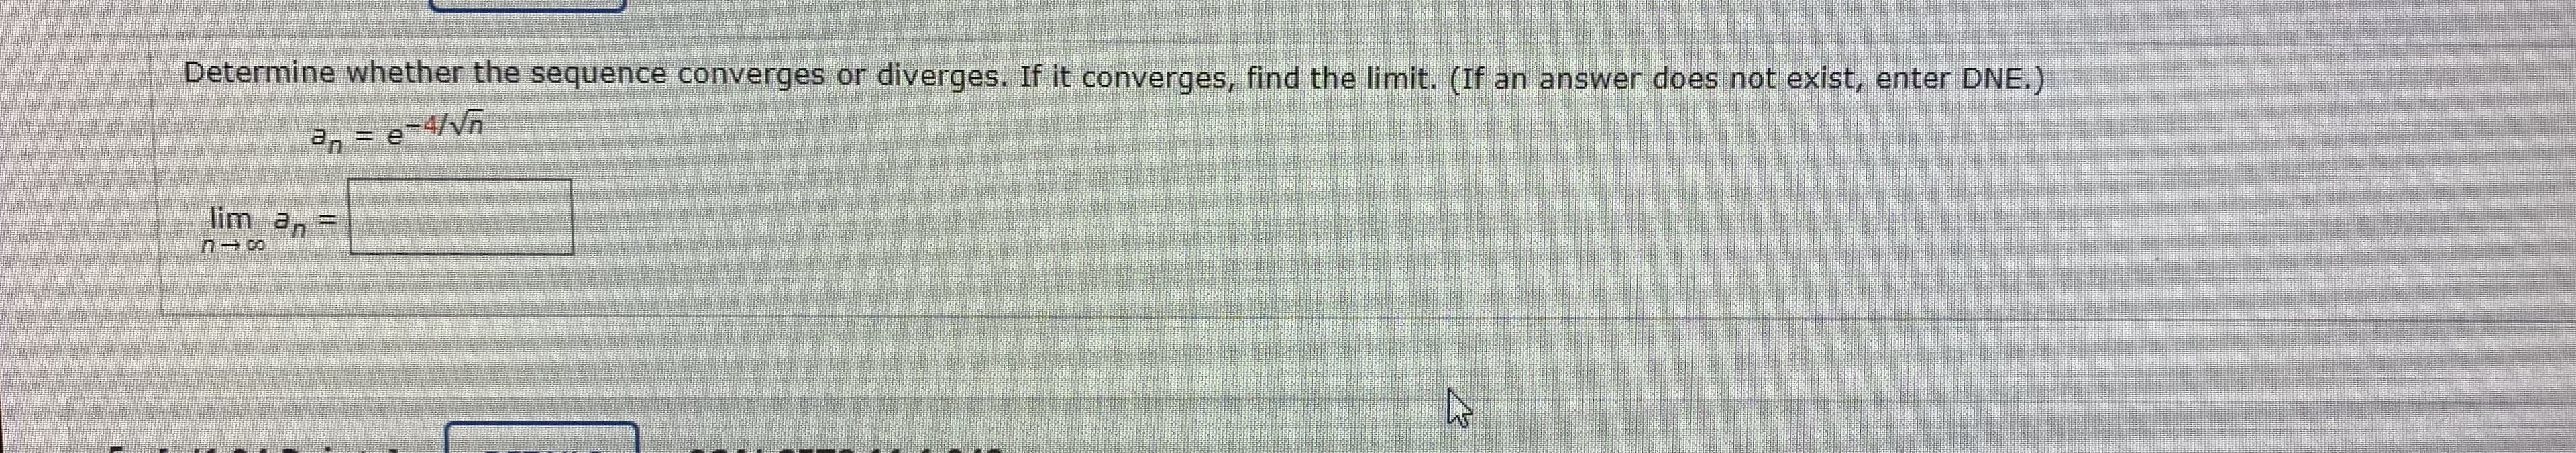 |Determine whether the sequence converges or diverges. If it converges, find the limit. (If an answer does not exist, enter DNE.)
a, = e
lim a,
%3D
